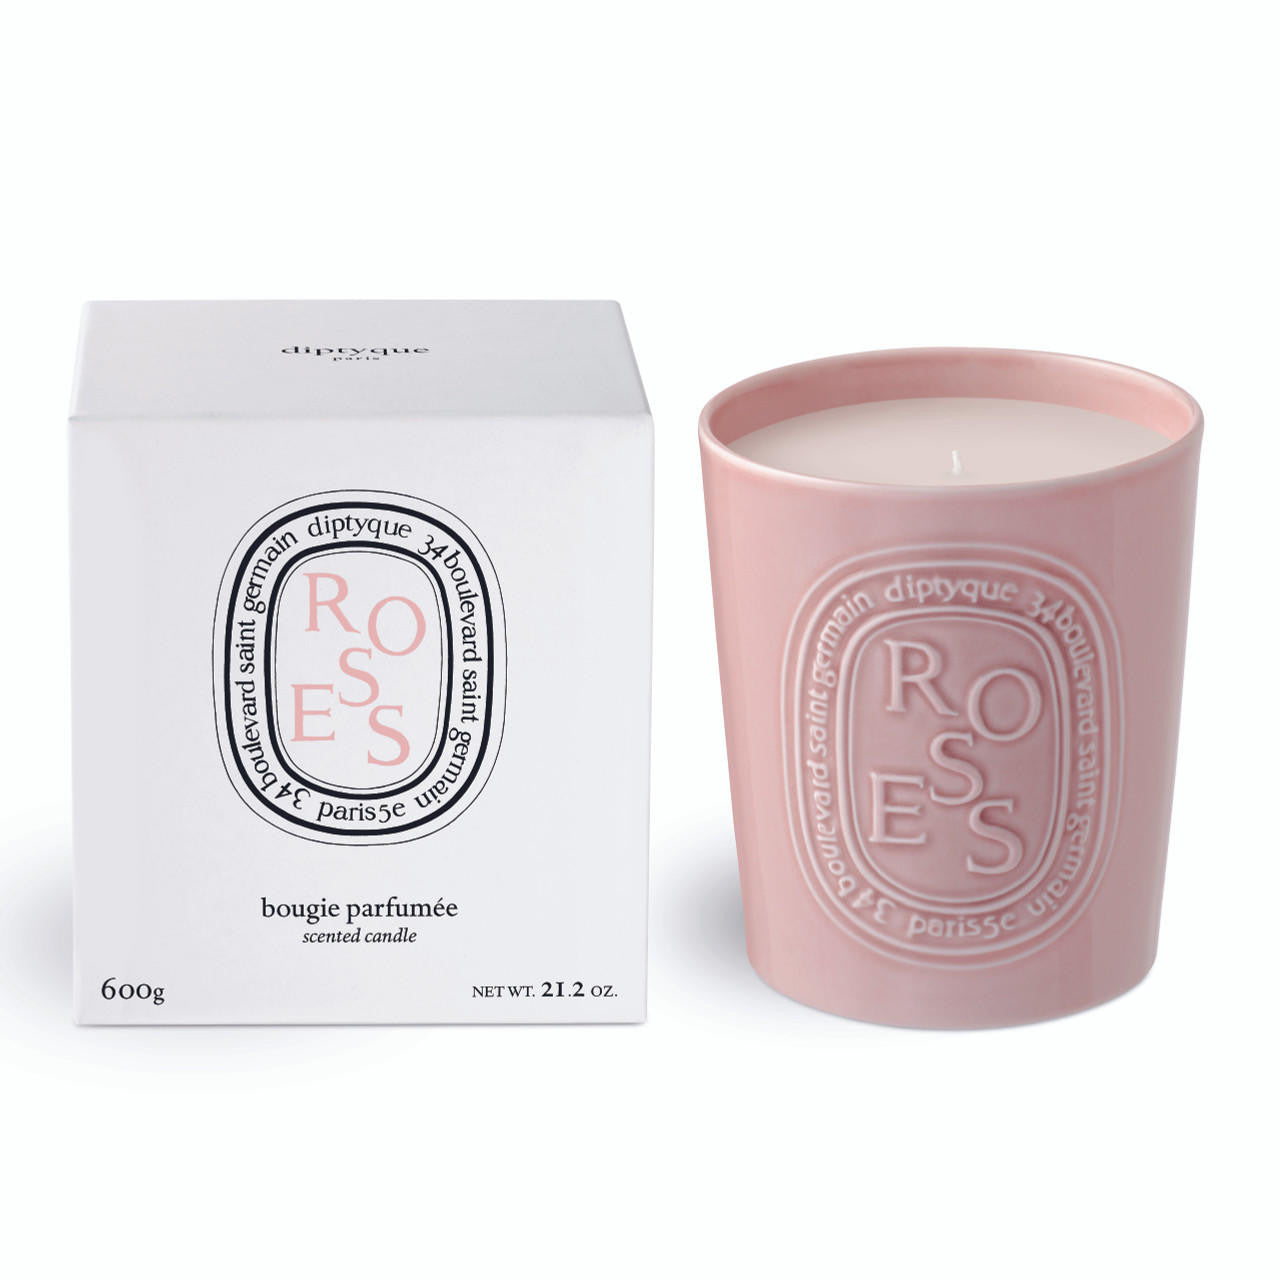  Diptyque Roses 3 Wick Candle 600g 